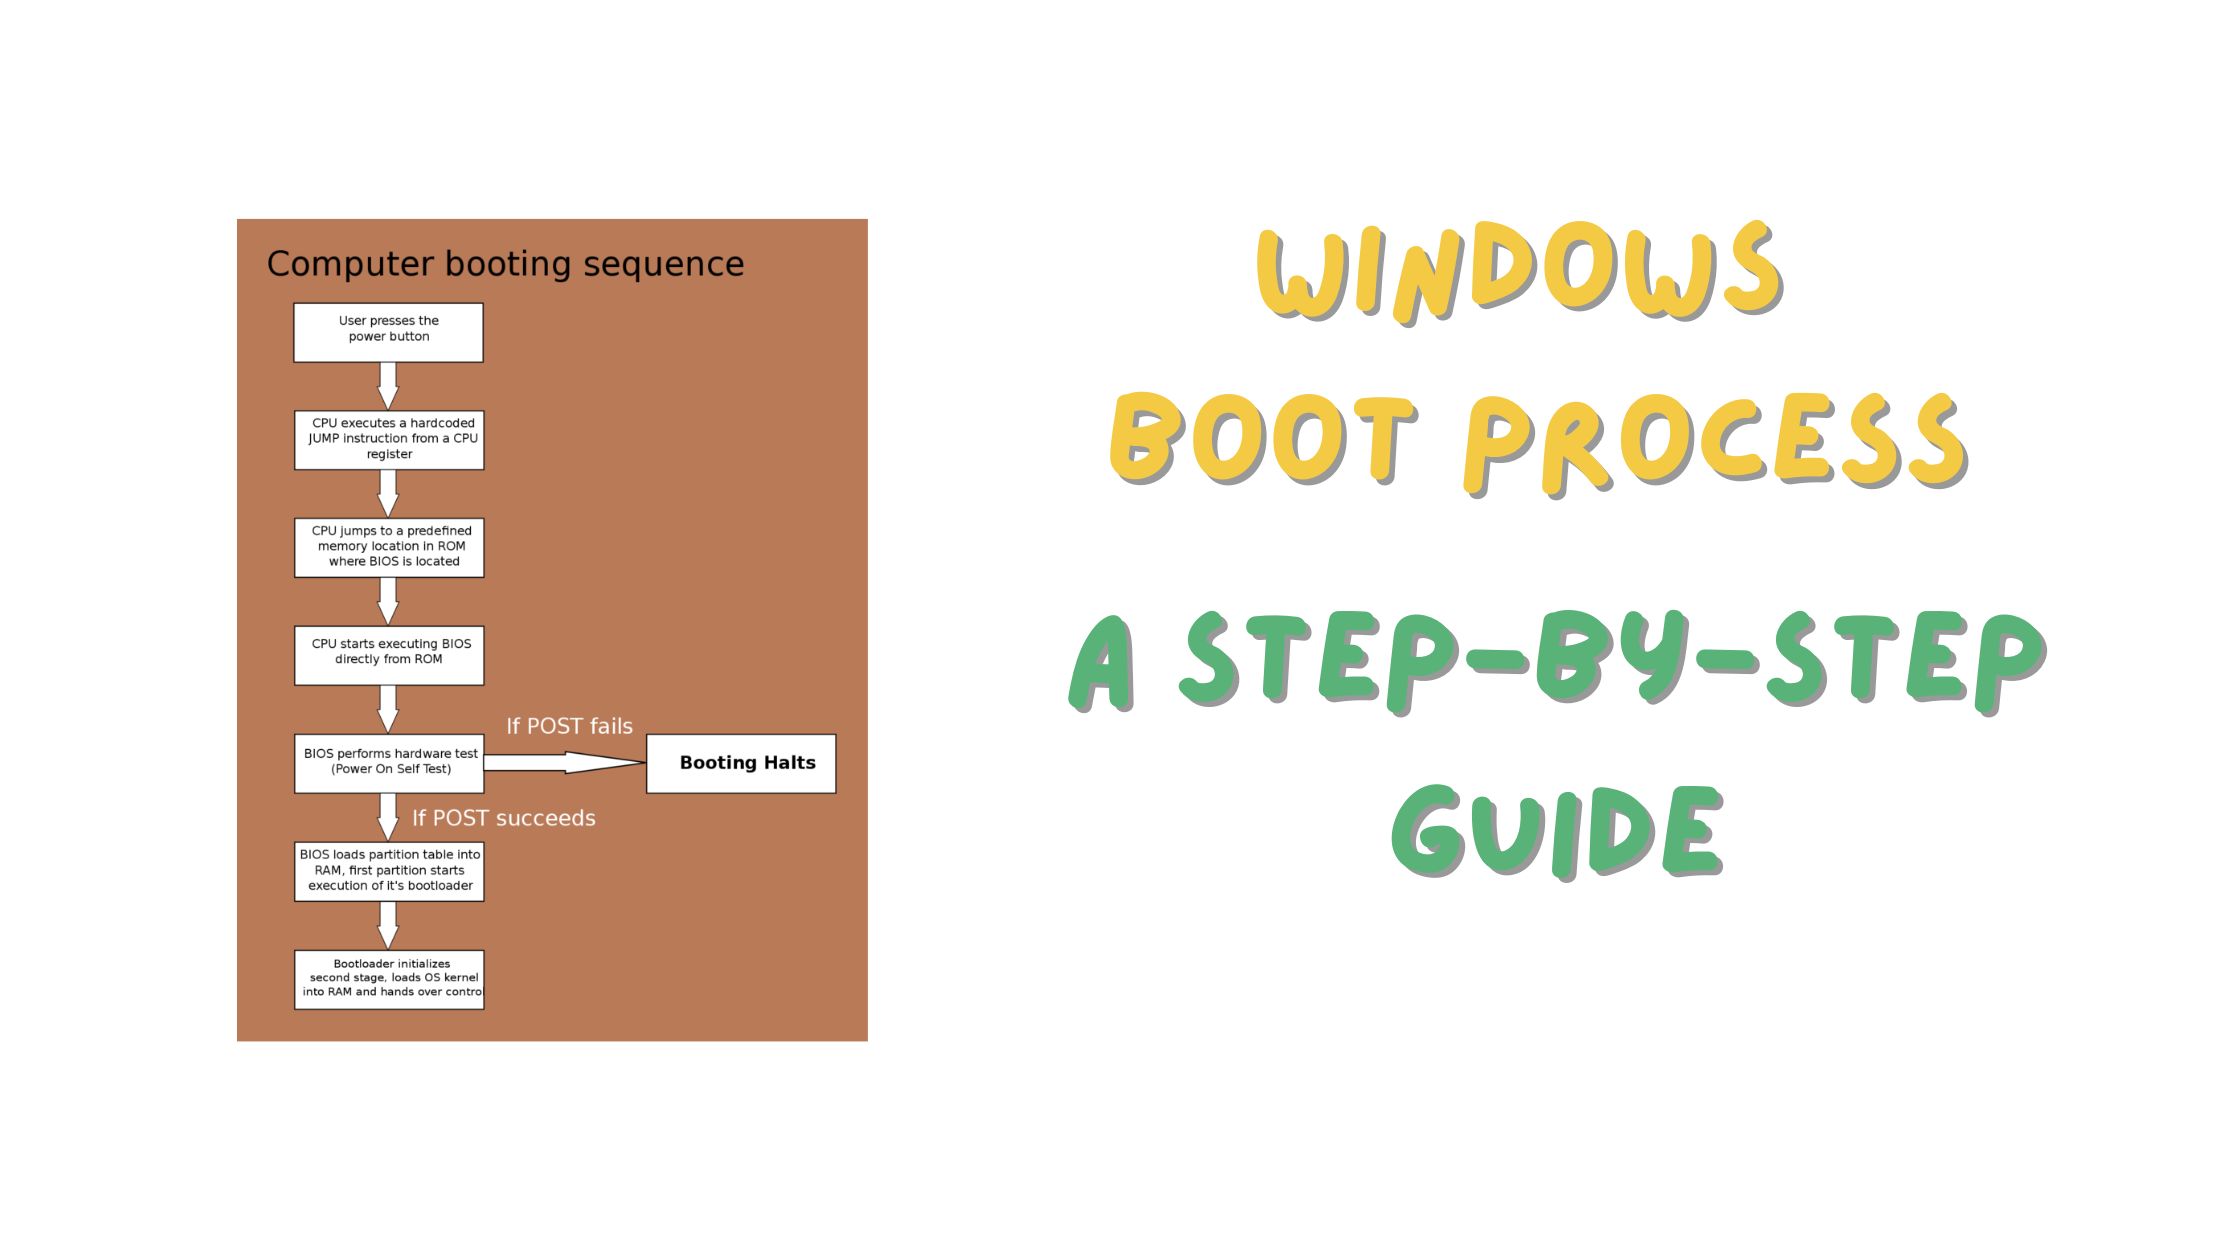 Windows Boot Process A Step-by-Step Guide